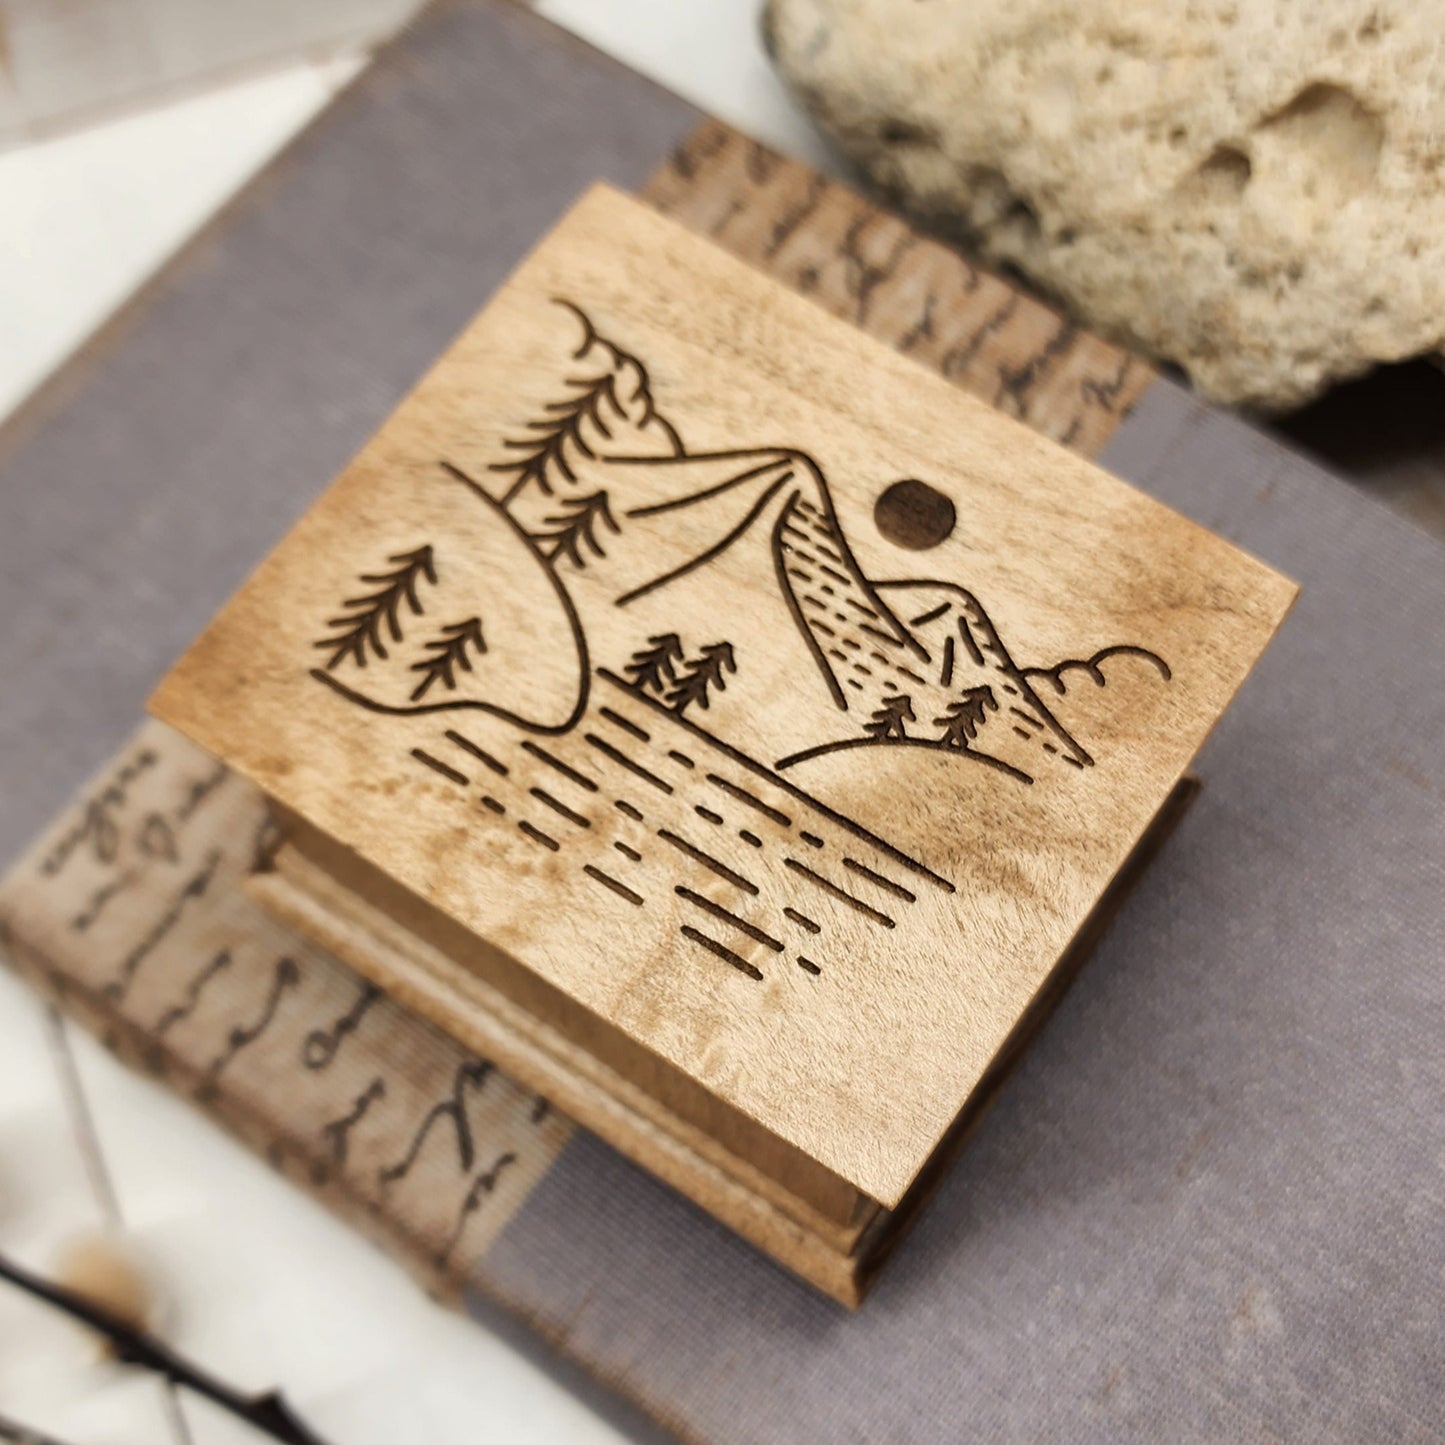 Music box with a mountain scene on top, choose color and song, add personalized message